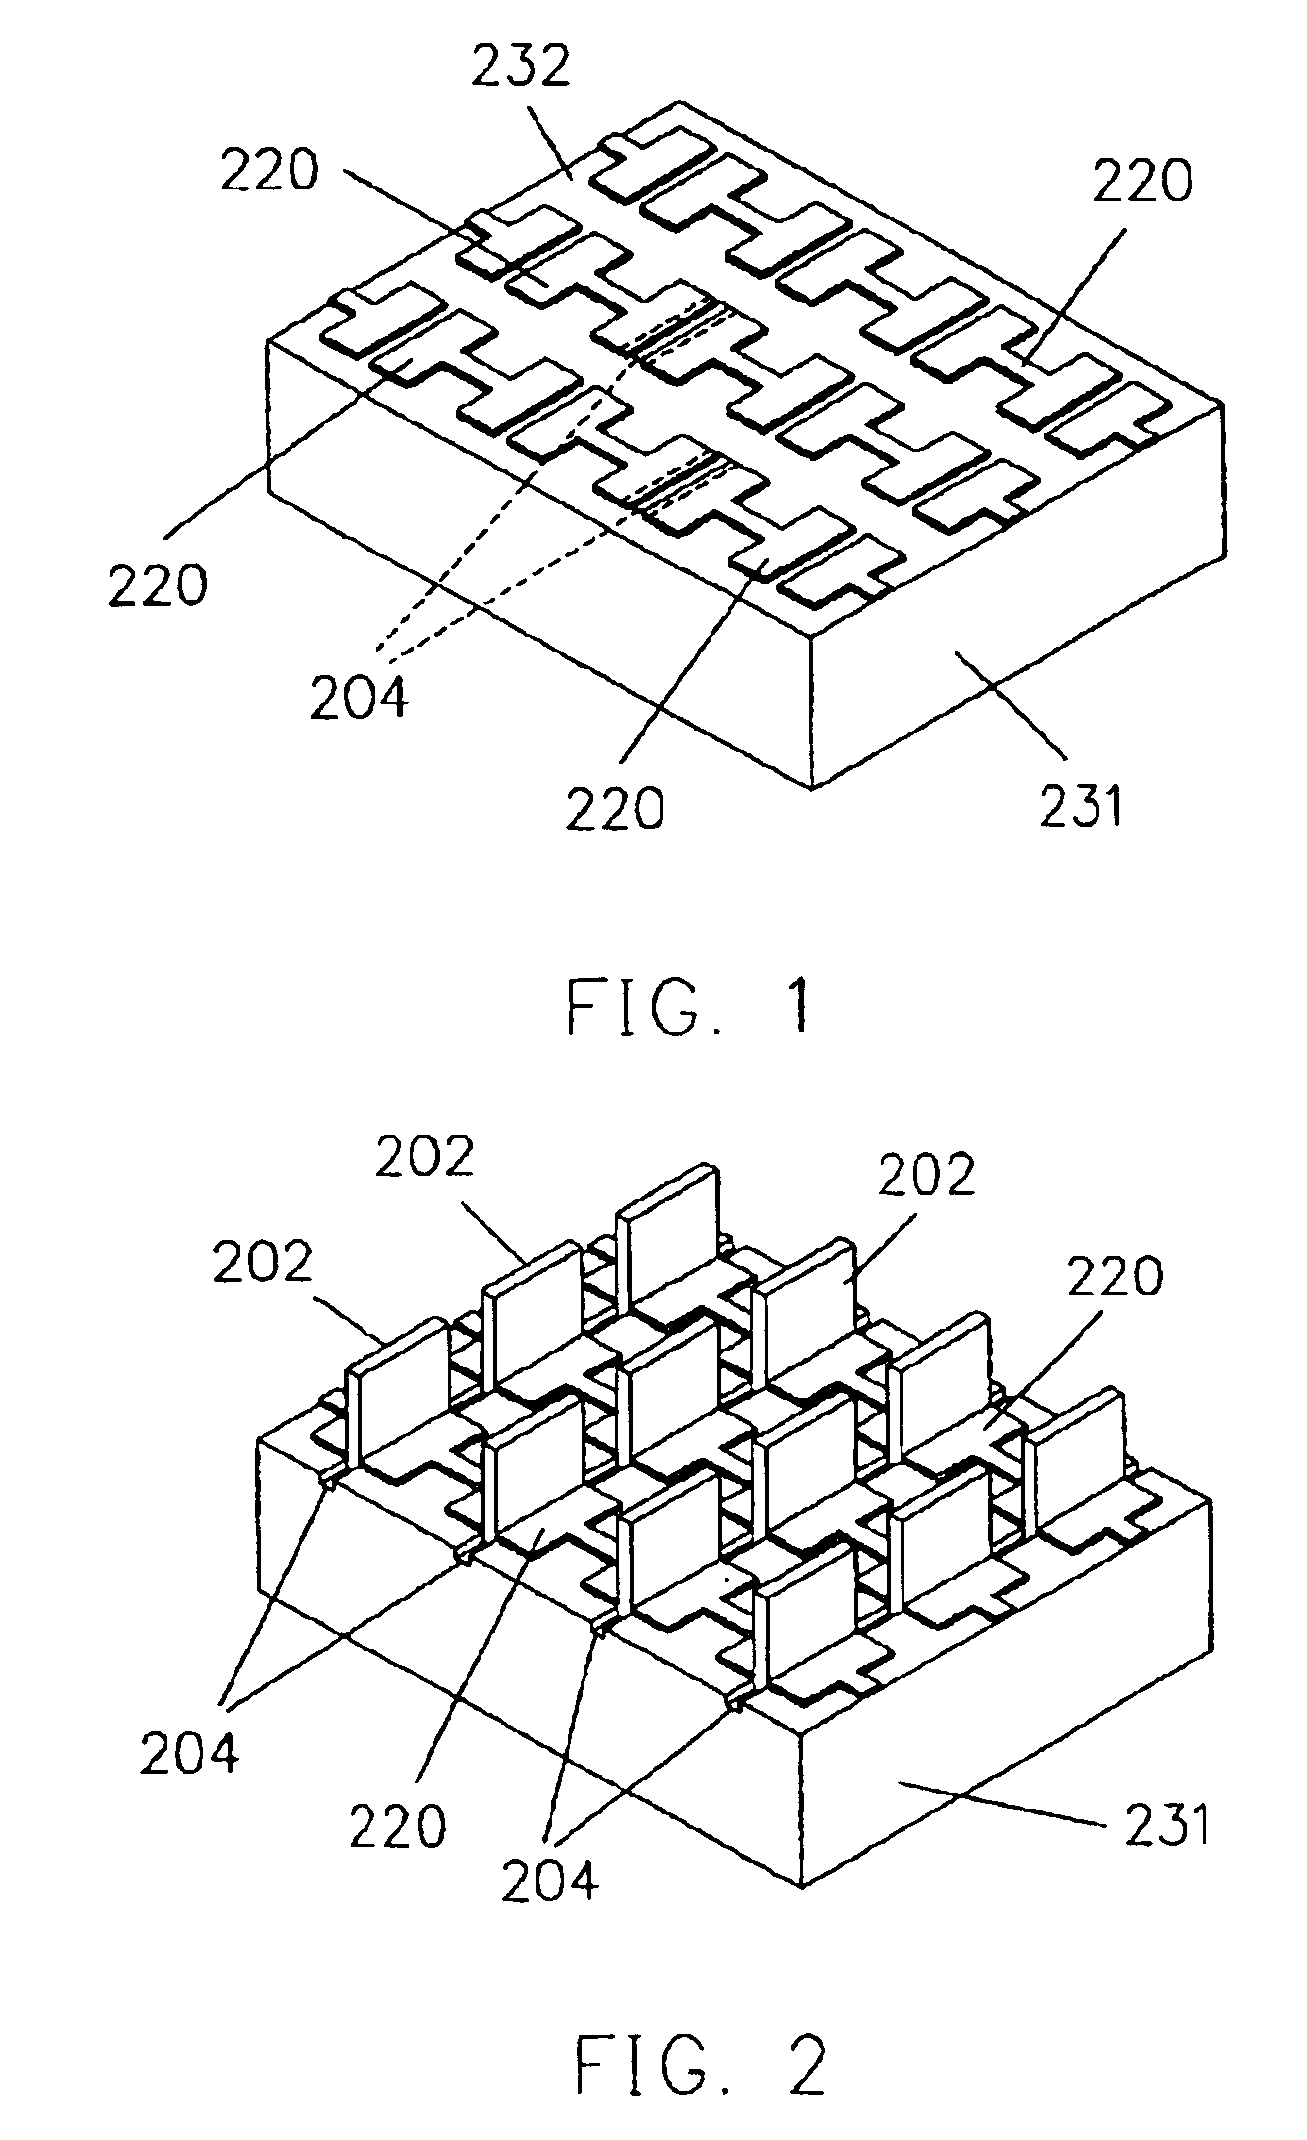 Discrete circuit component having an up-right circuit die with lateral electrical connections